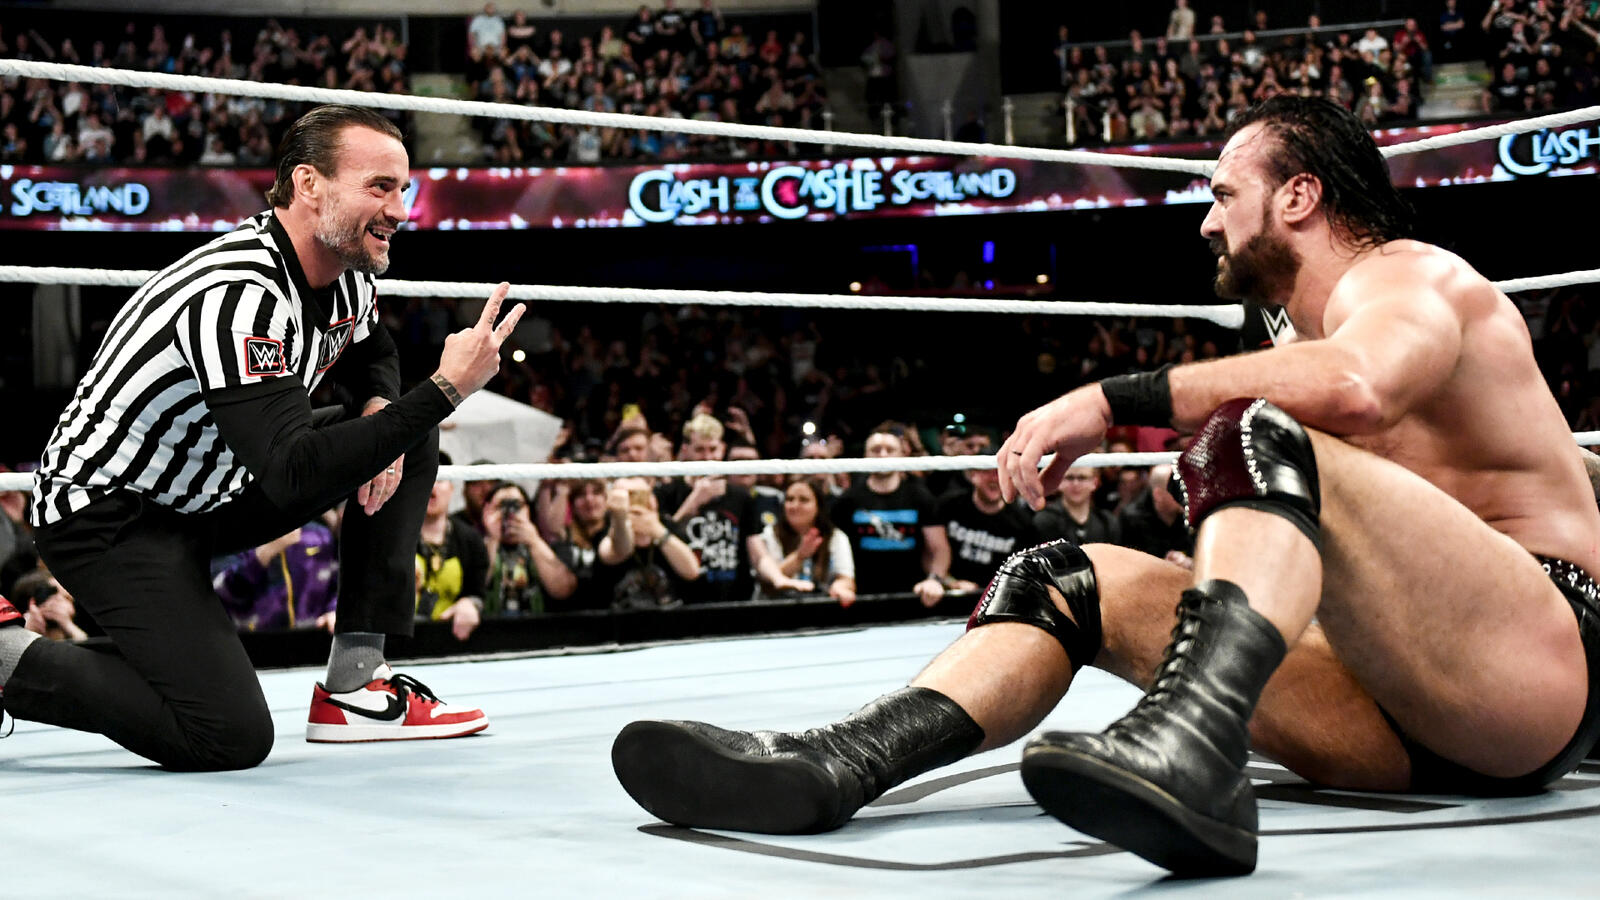 WWE Clash at the Castle picture of Drew McIntyre and CM Punk